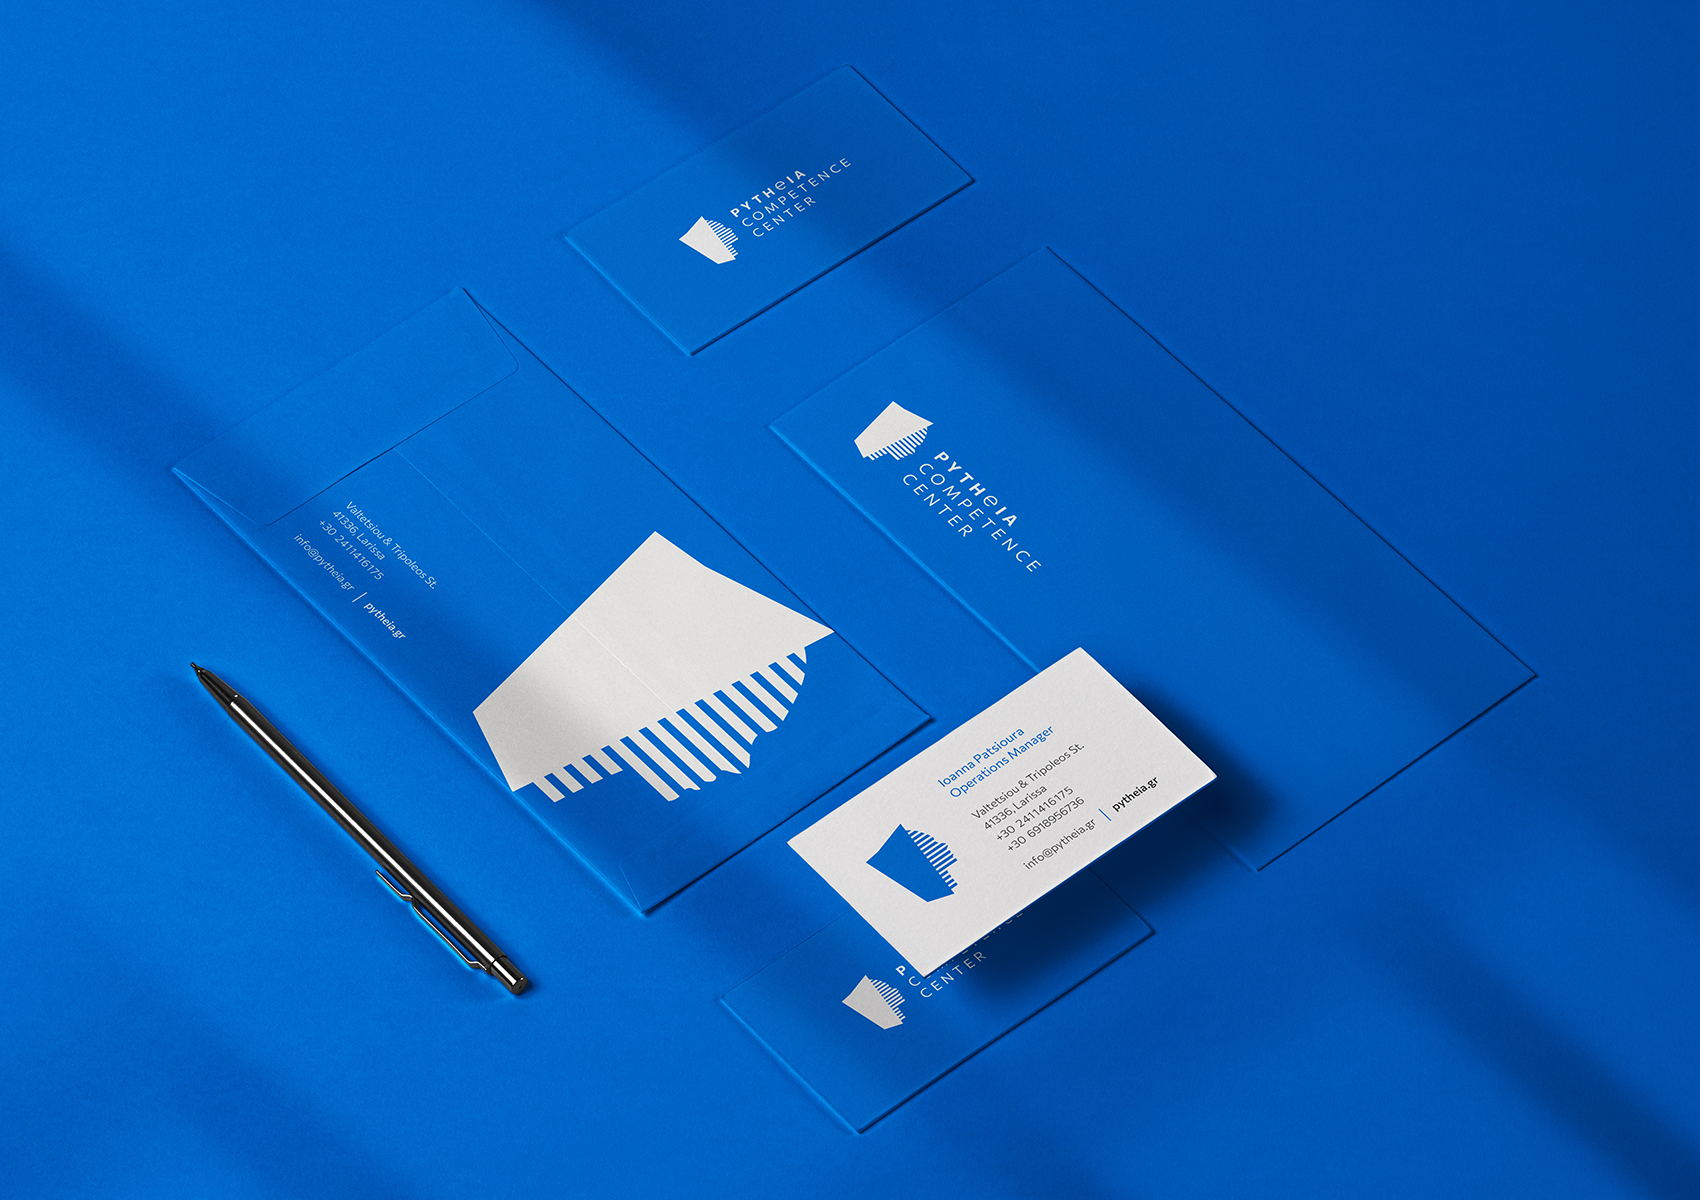 PYTHeIA Competence Center envelope 1700x1200 by xhristakis